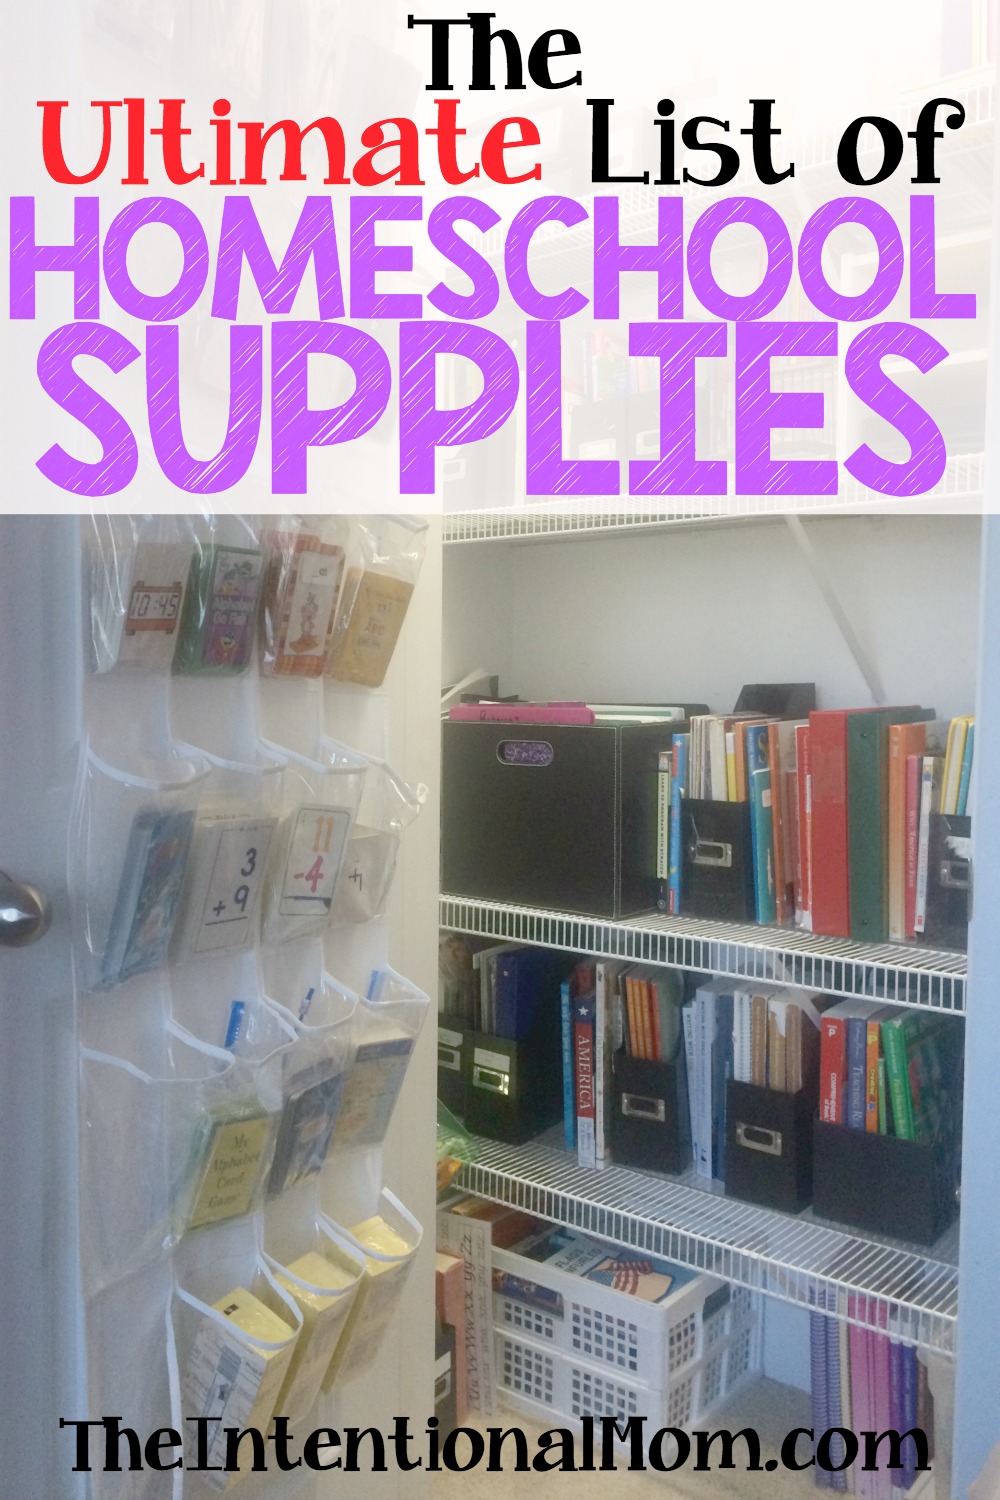 The Ultimate List of Homeschool Supplies